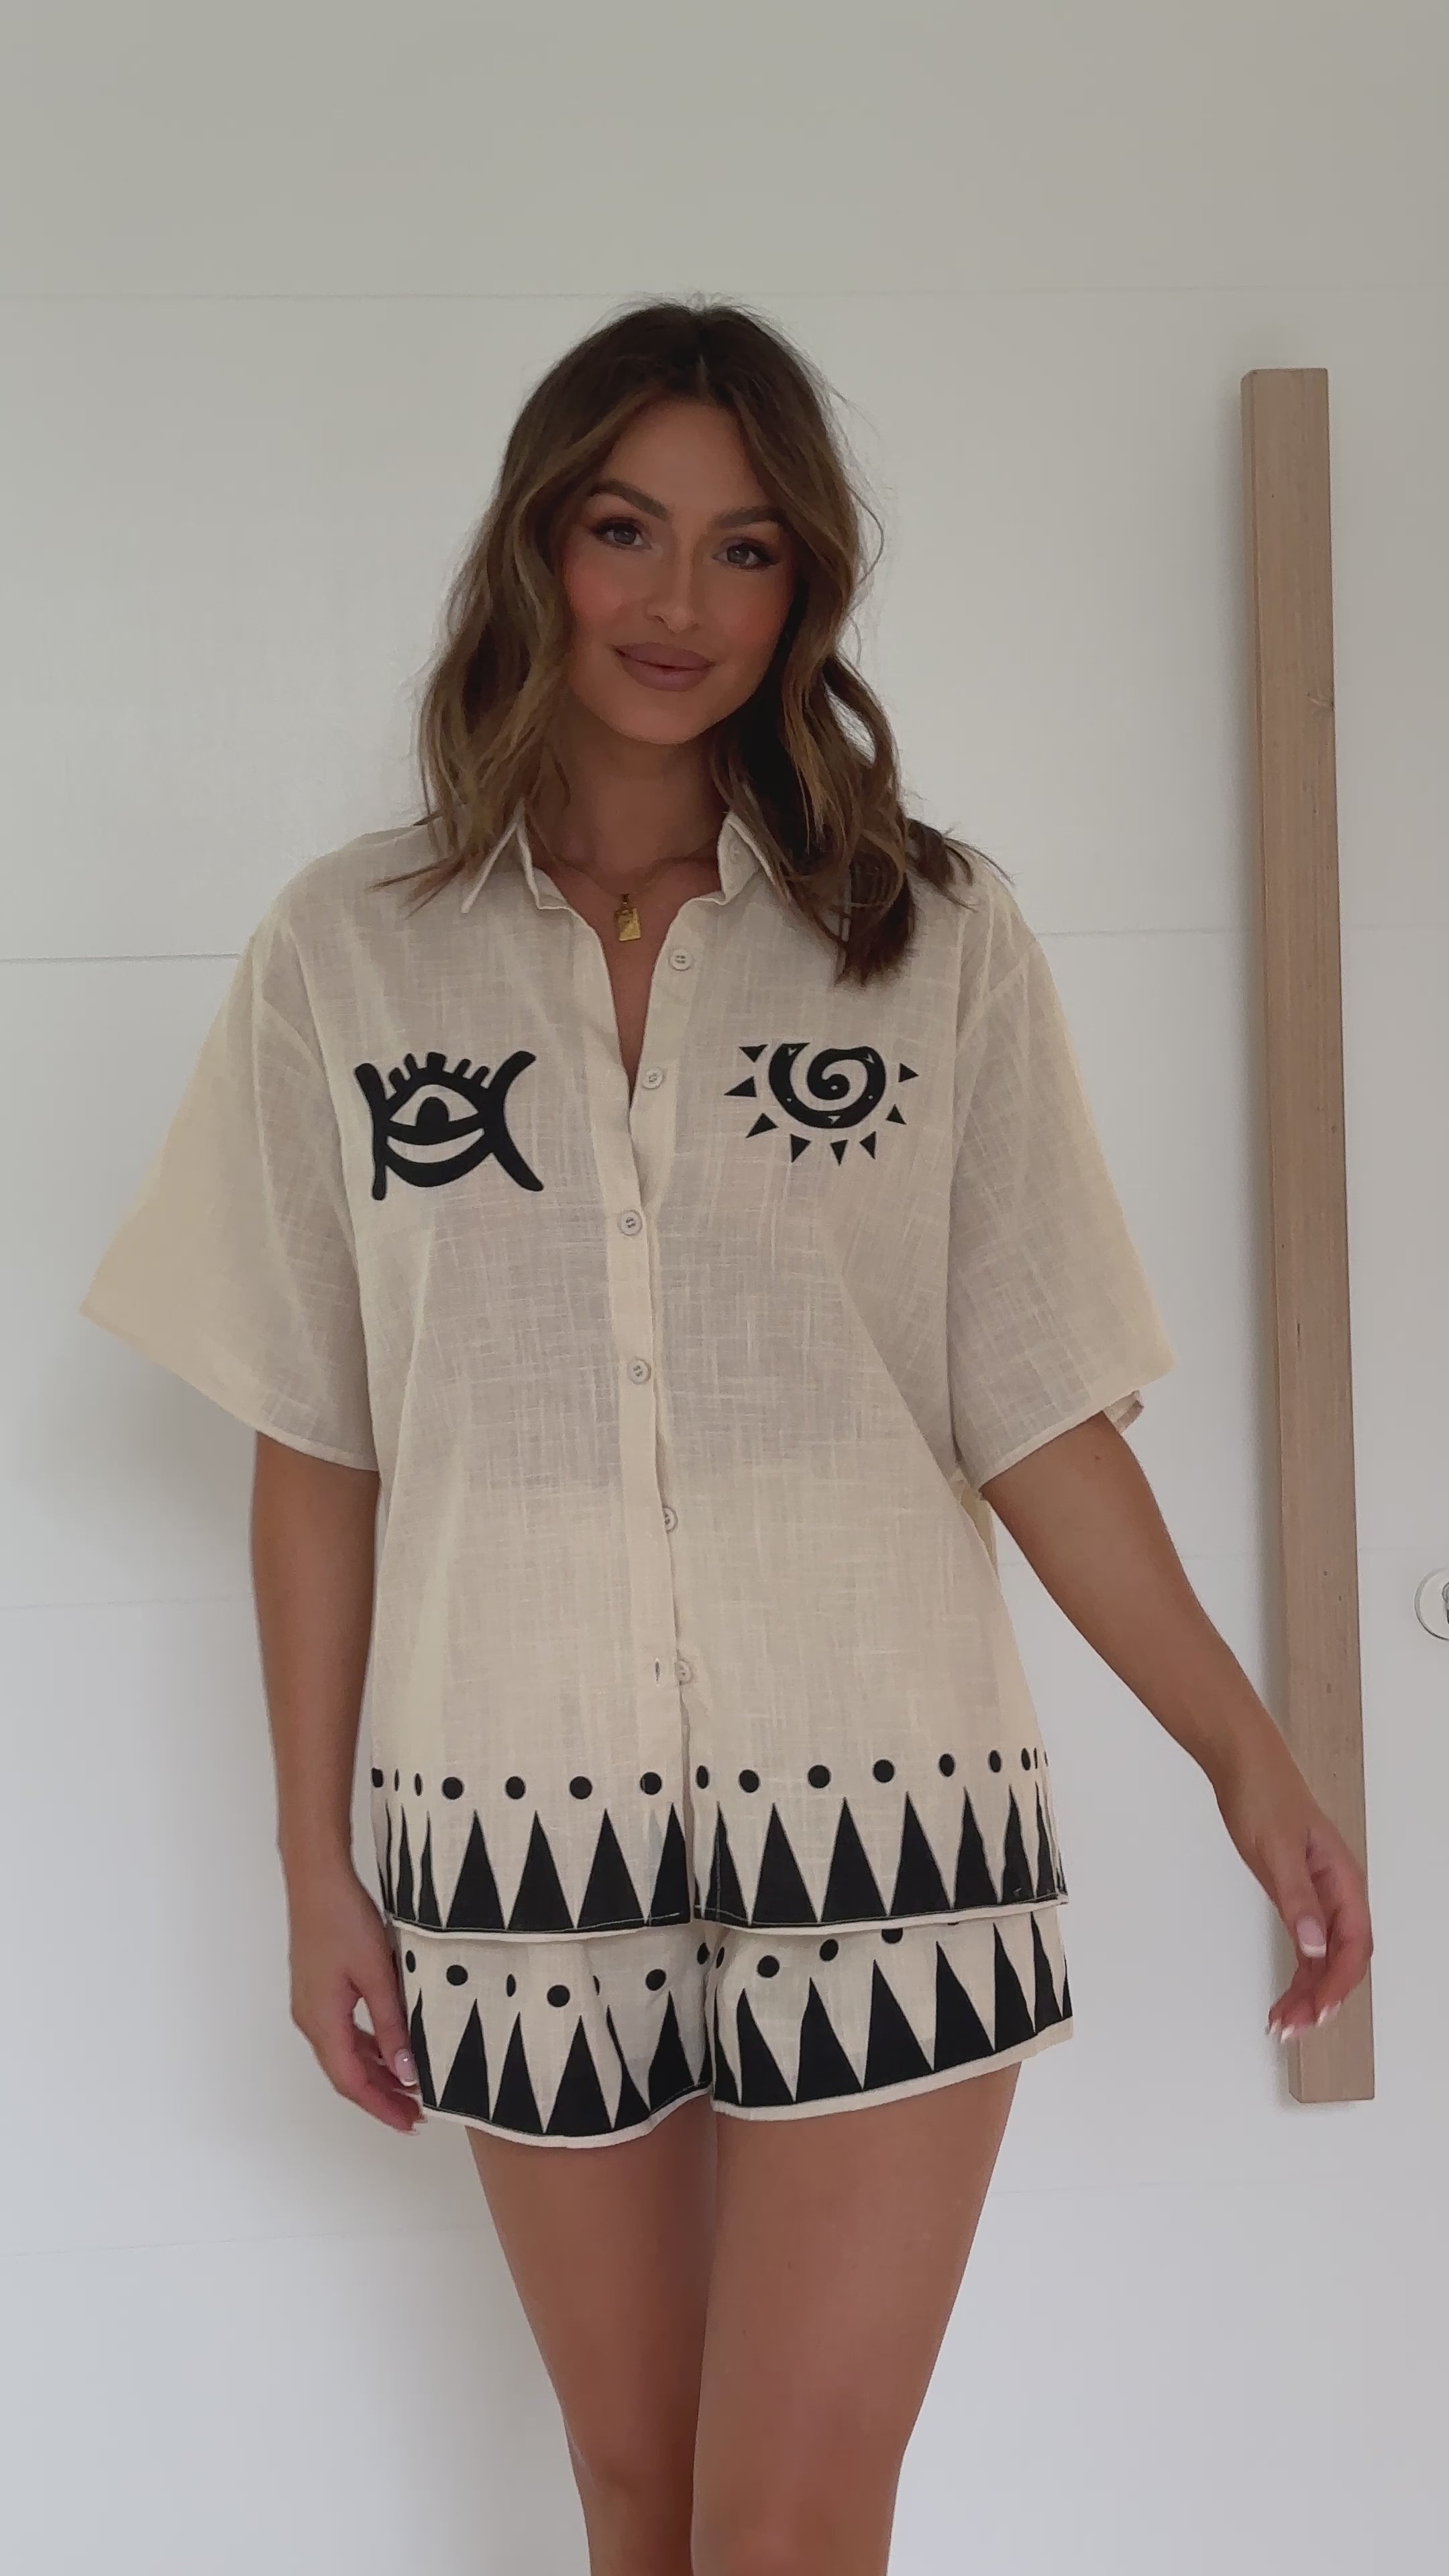 Angie Button Up Shirt and Shorts Set - Beige/Black Snake